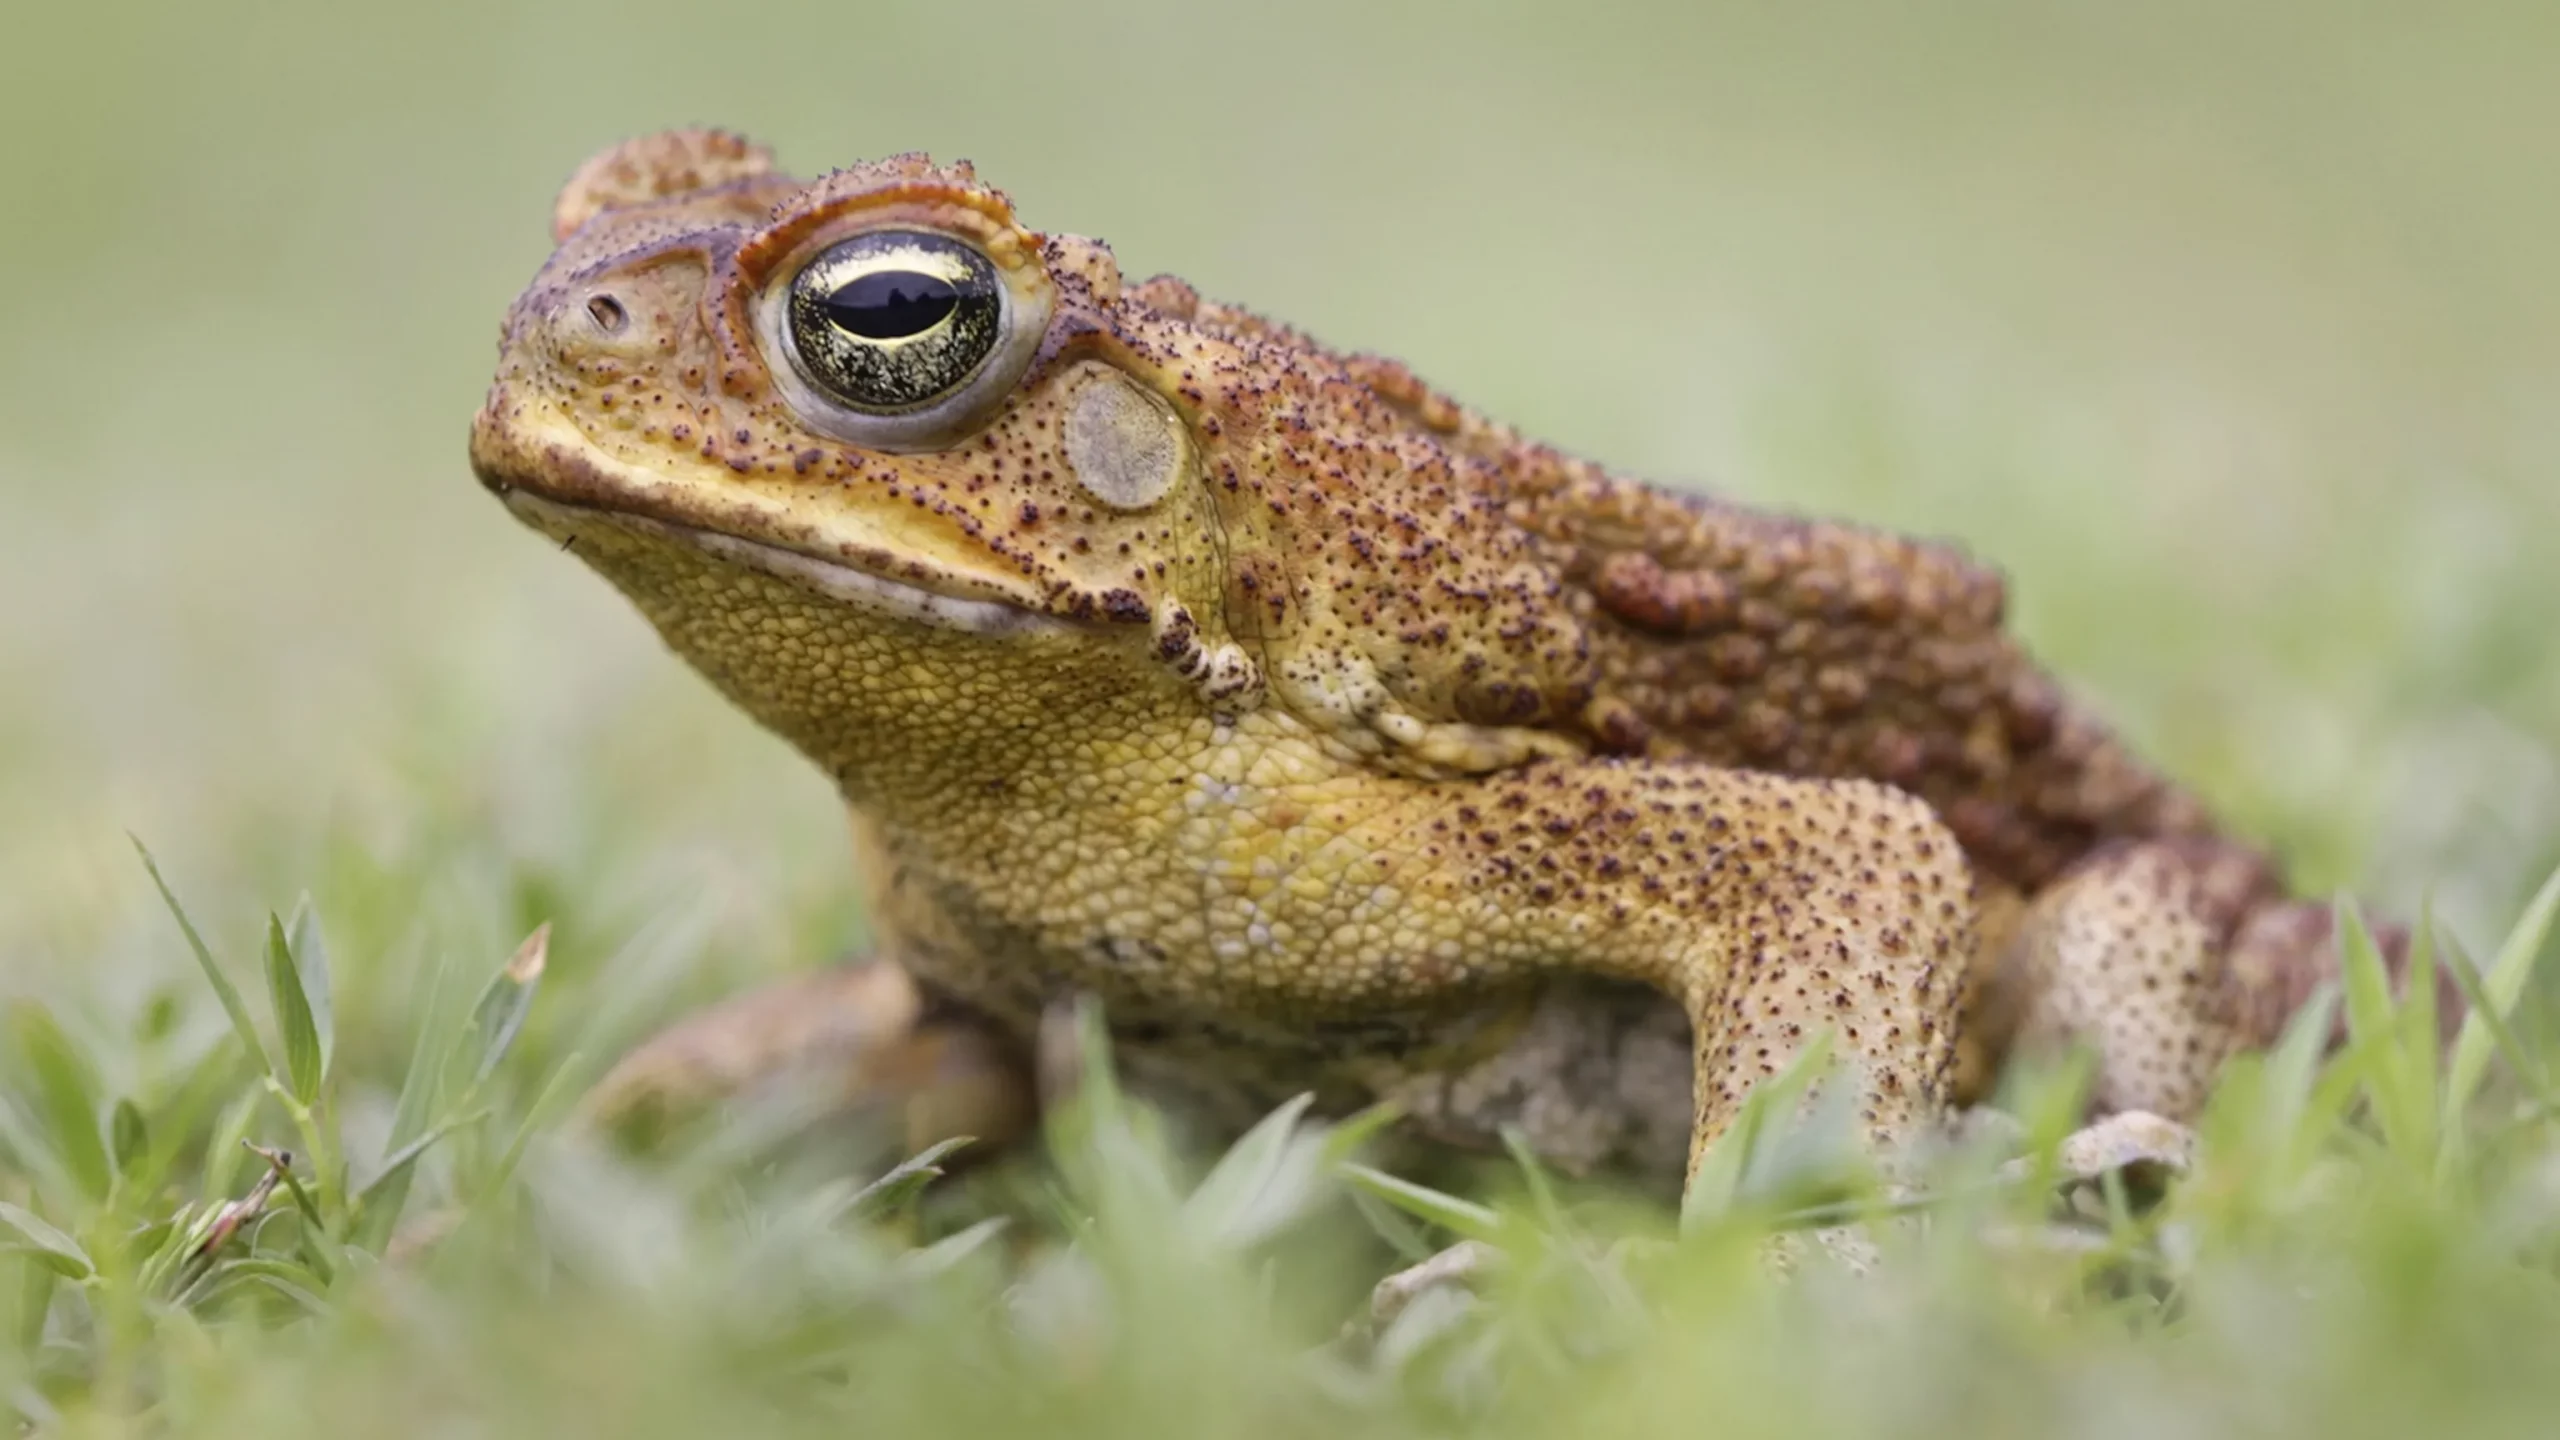 How to Identify a Toad